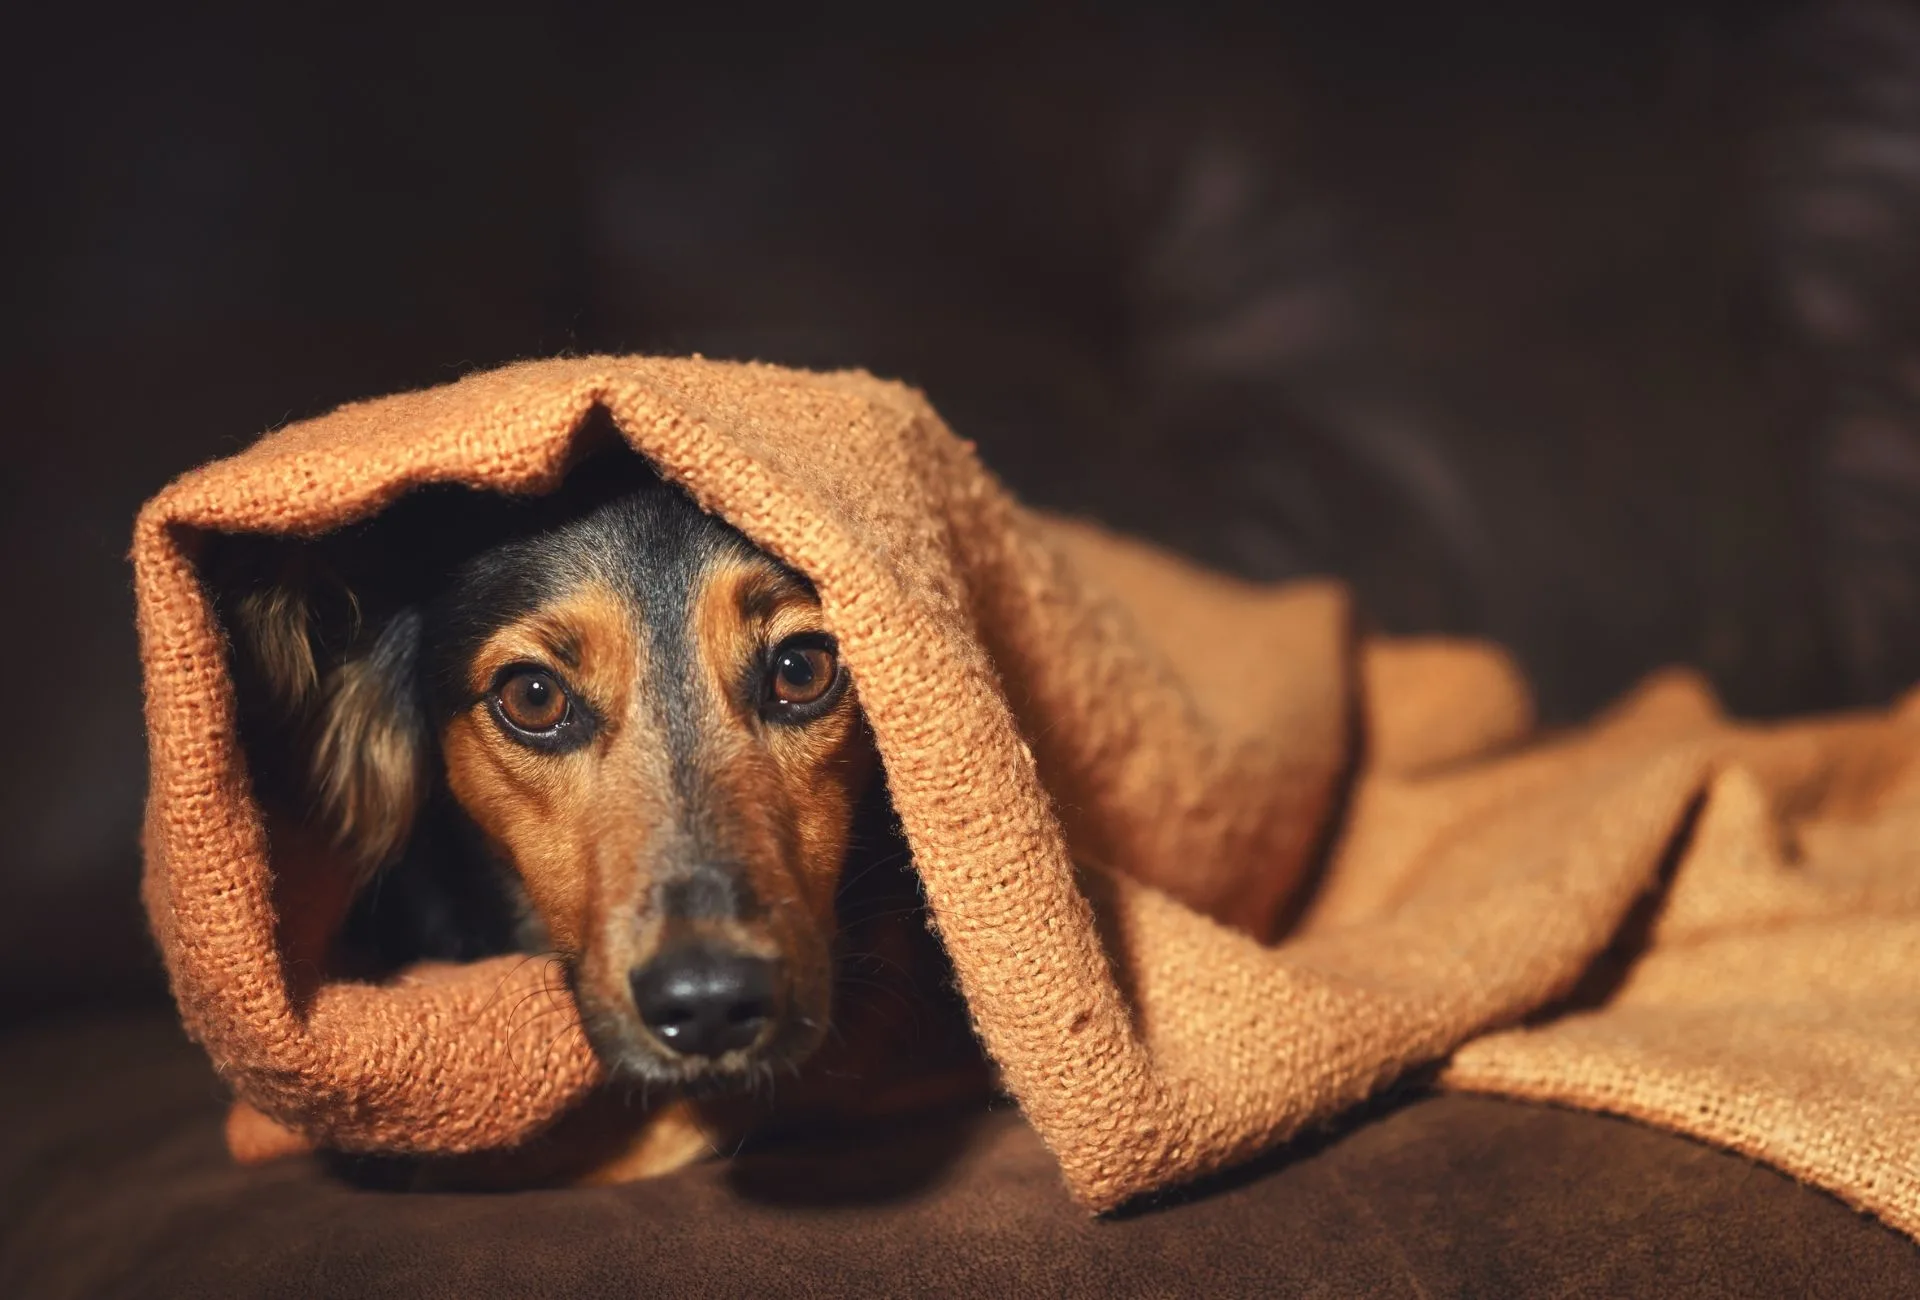 Paranoia in dogs can be one of the reasons why this small dog suddenly acts anxious and hides under a brown blanket.